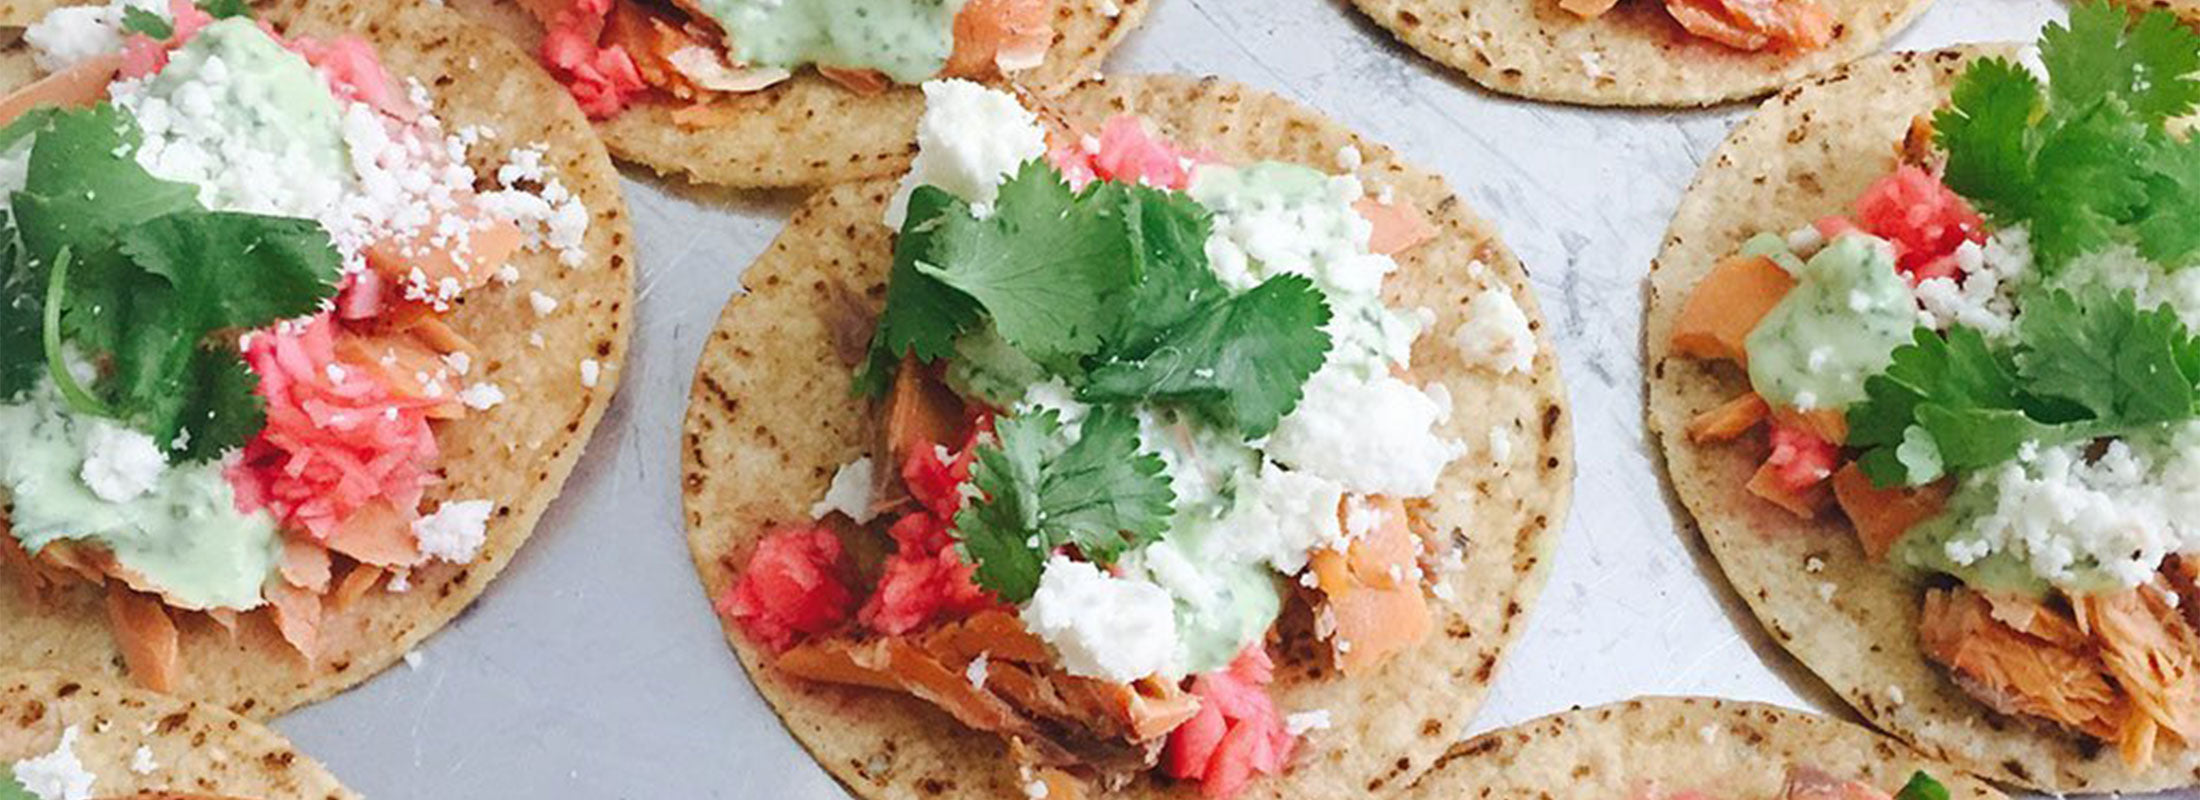 A tray of open tostadas, filled with Patagonia Provisions Wild Sockeye Salmon, cheese, sauce, and cilantro